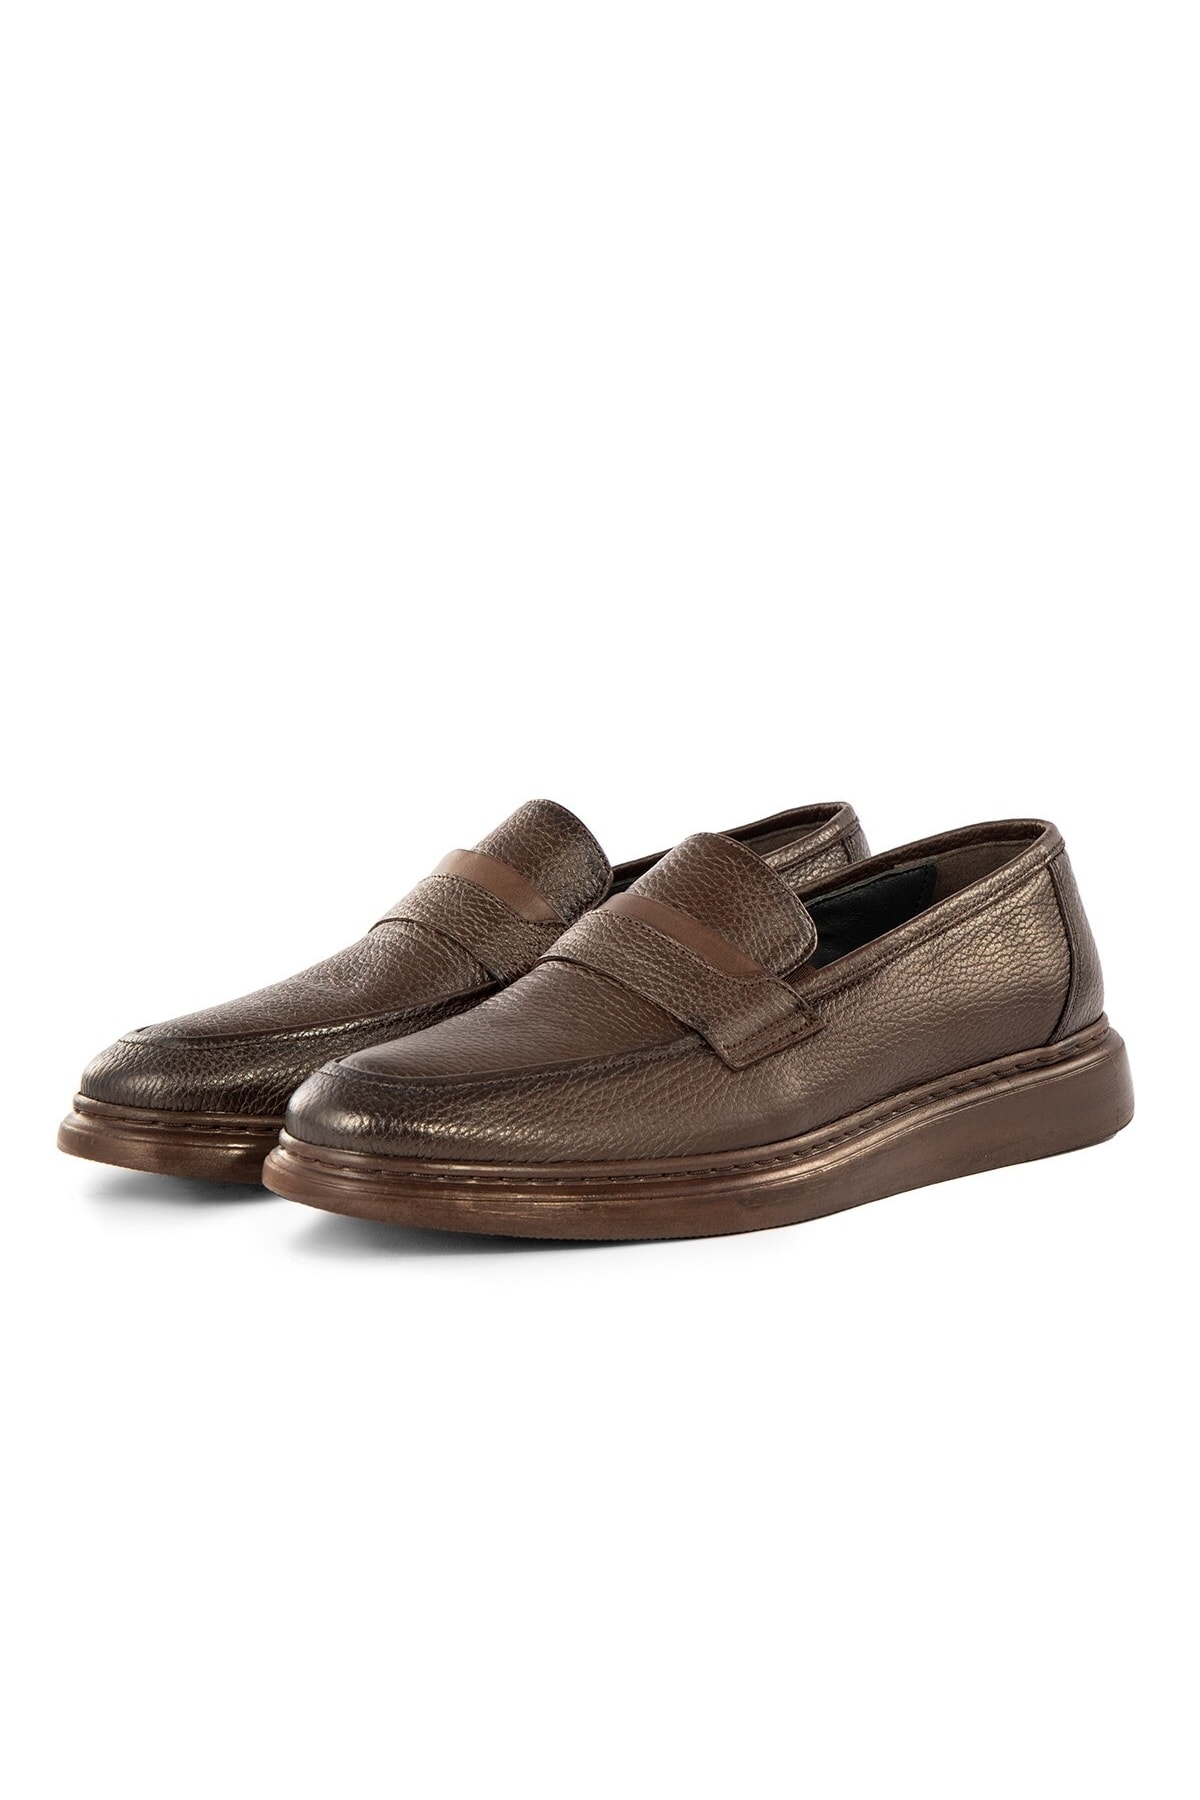 Levně Ducavelli Frio Genuine Leather Men's Casual Classic Shoes, Loafers Classic Shoes.